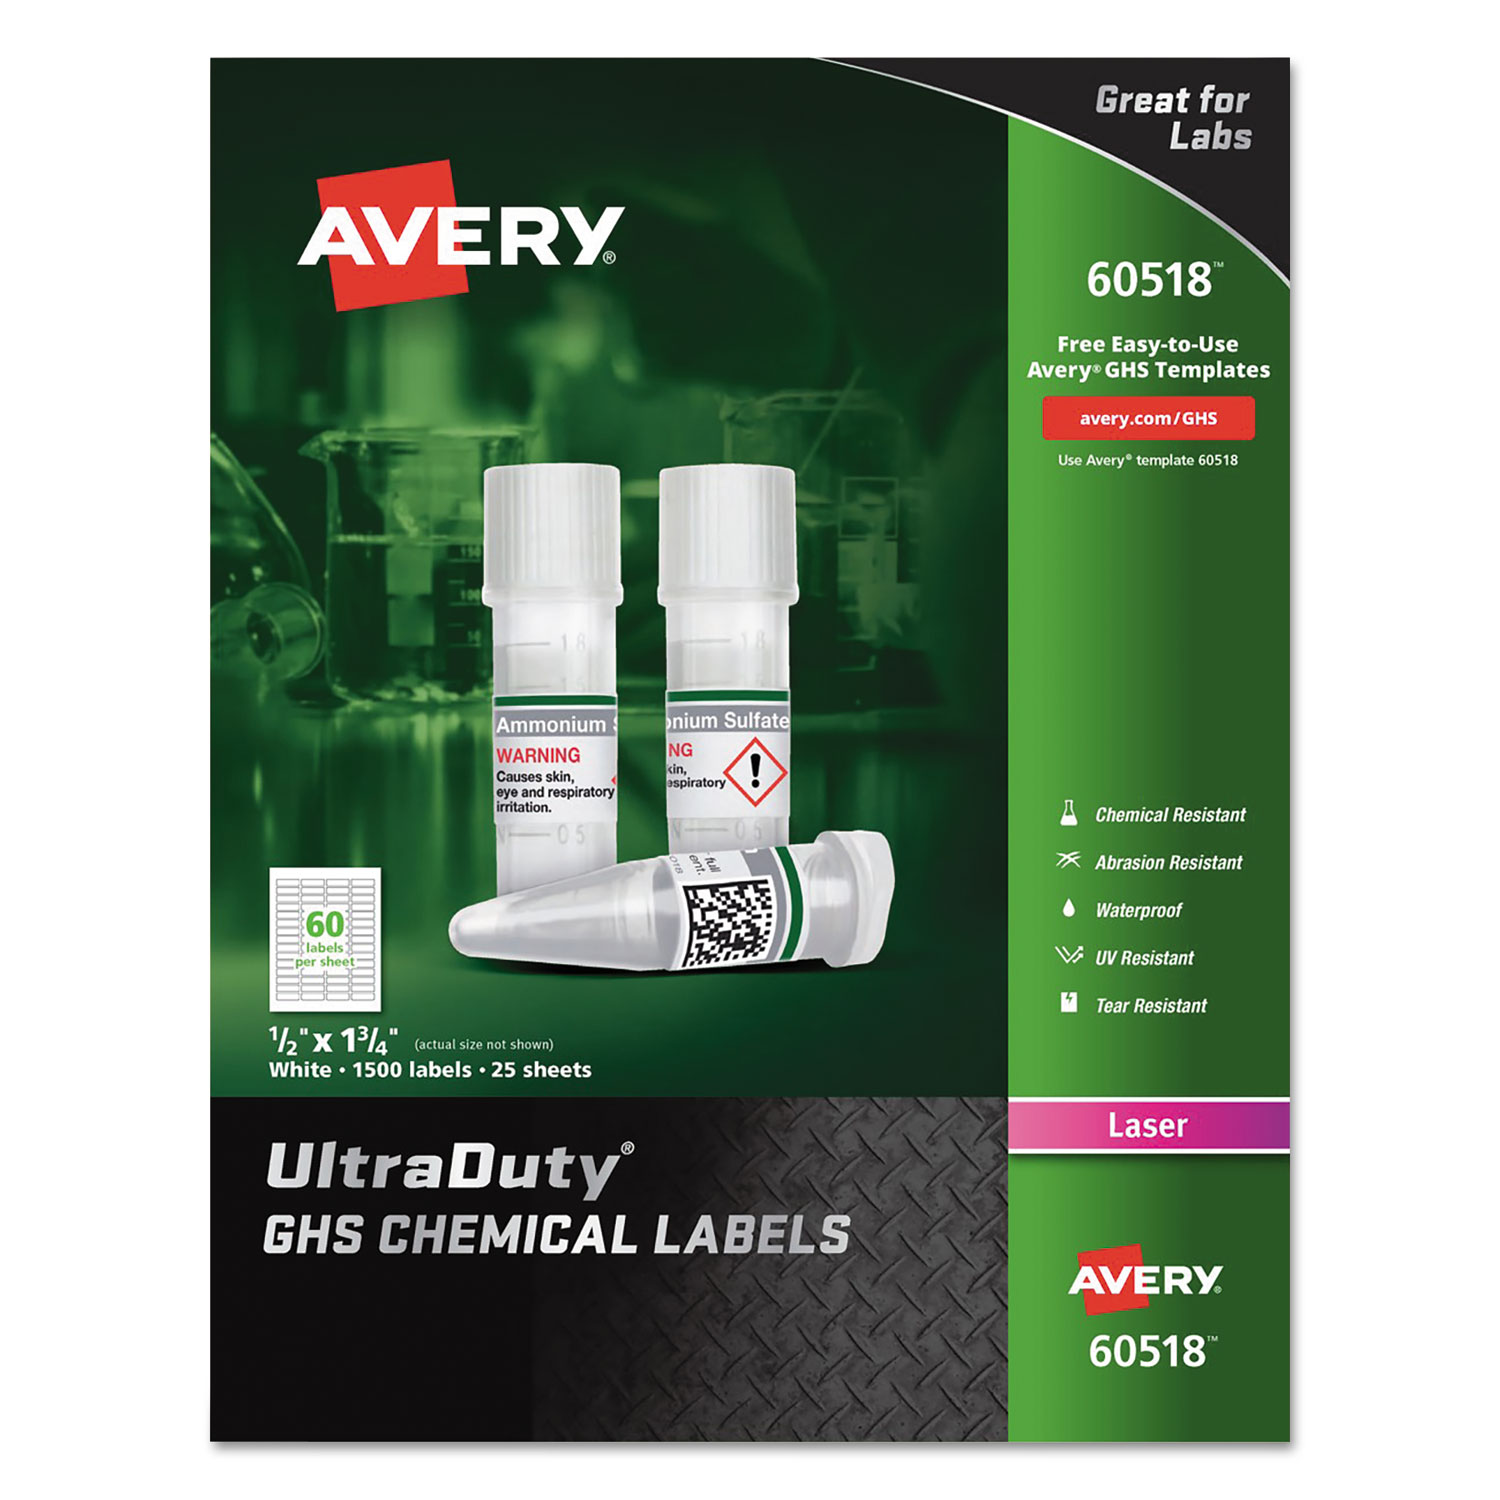  Avery 60518 UltraDuty GHS Chemical Waterproof and UV Resistant Labels, 0.5 x 1.75, White, 60/Sheet, 25 Sheets/Pack (AVE60518) 